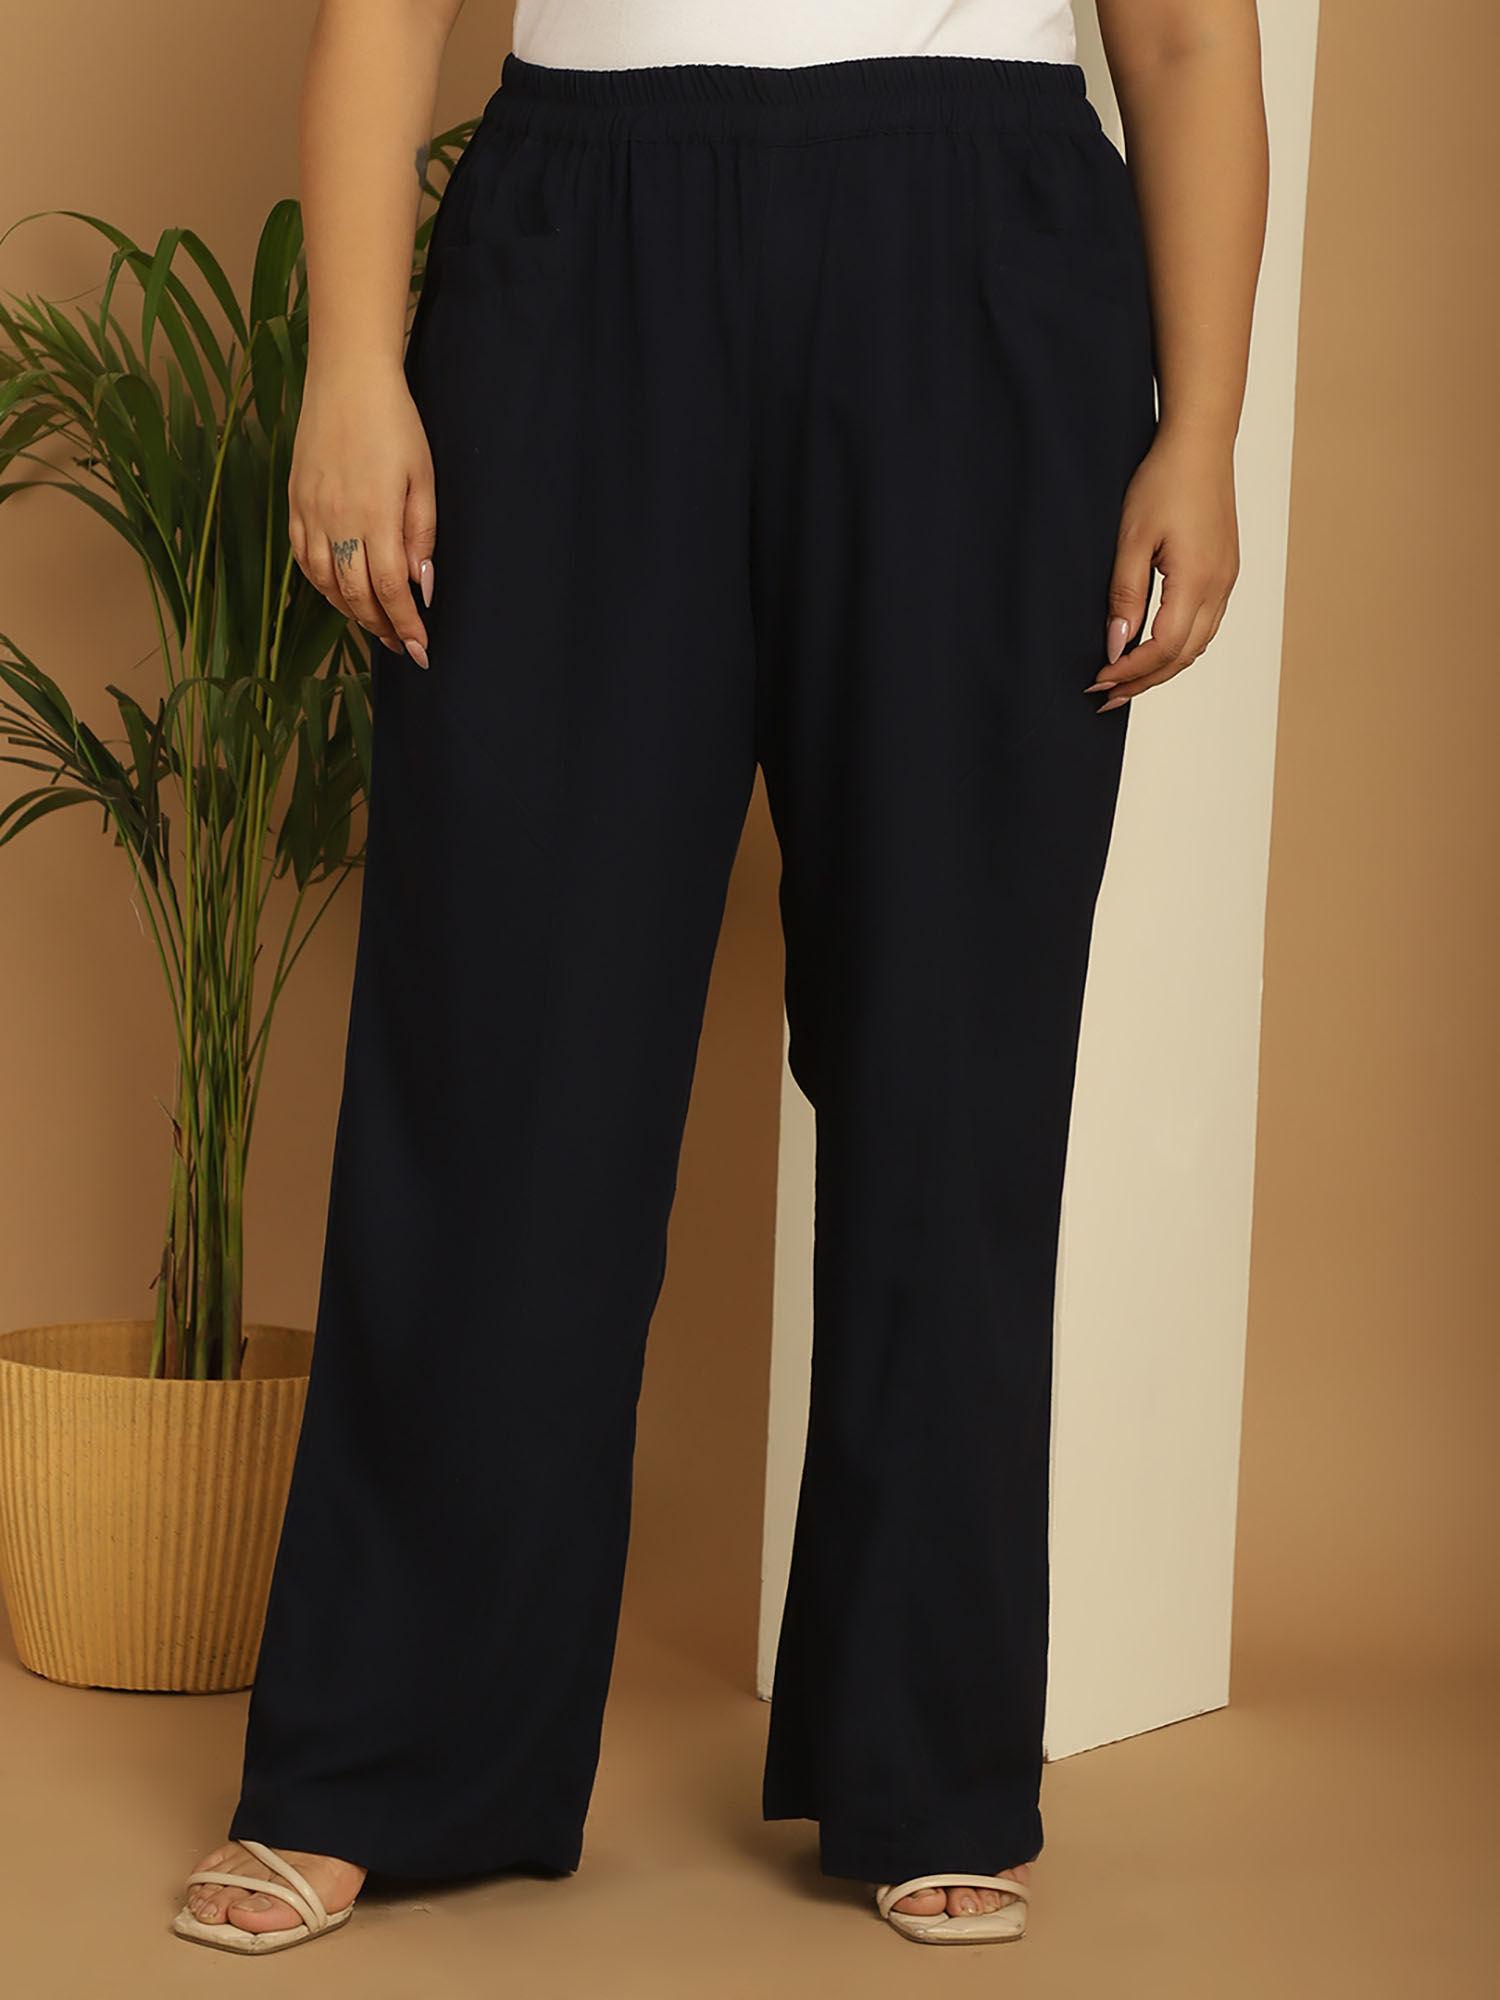 plus size women's navy blue solid color wide palazzos